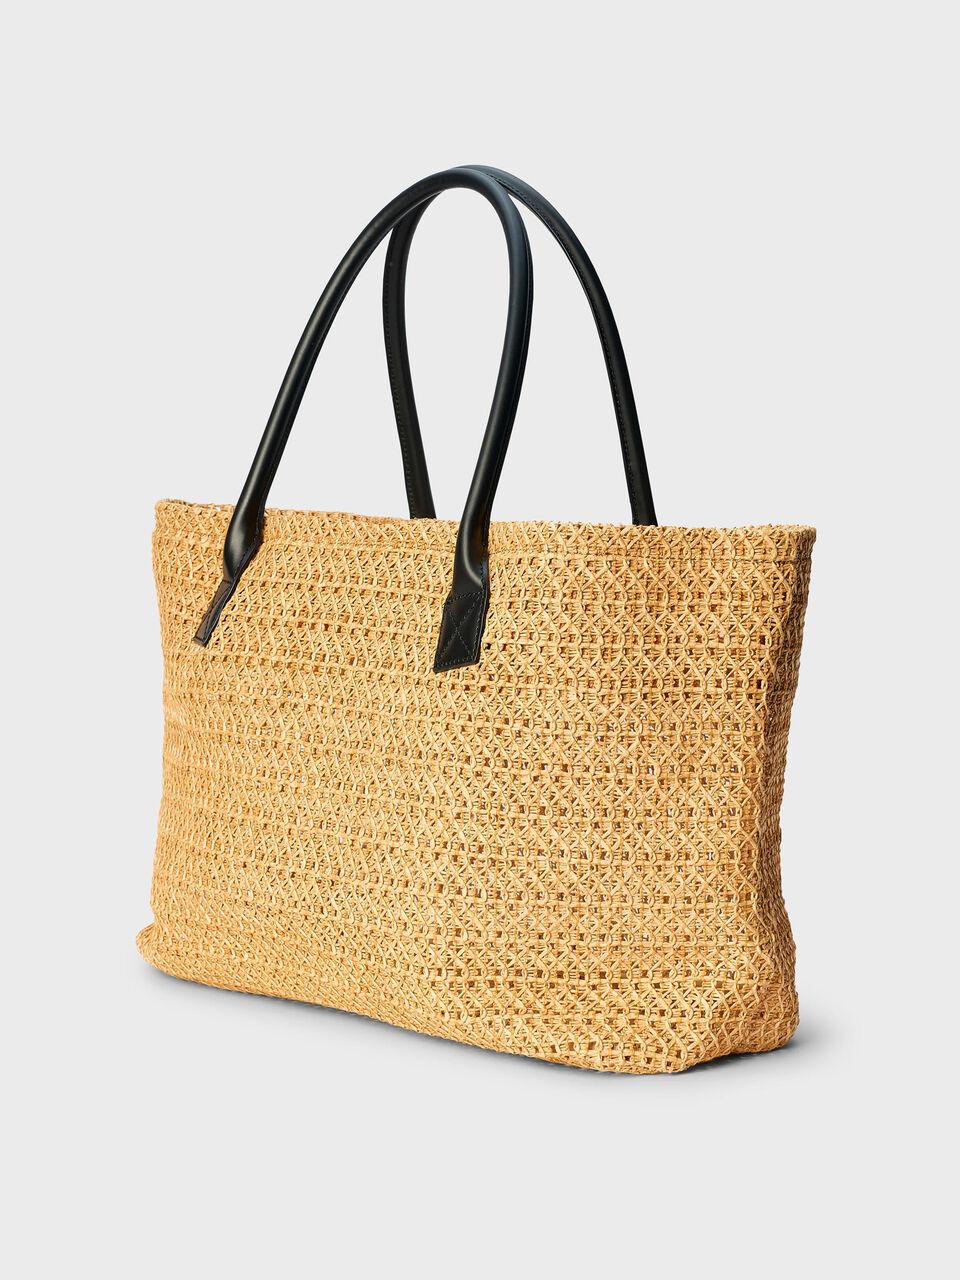 Avali woven bag - Buy Accessories online